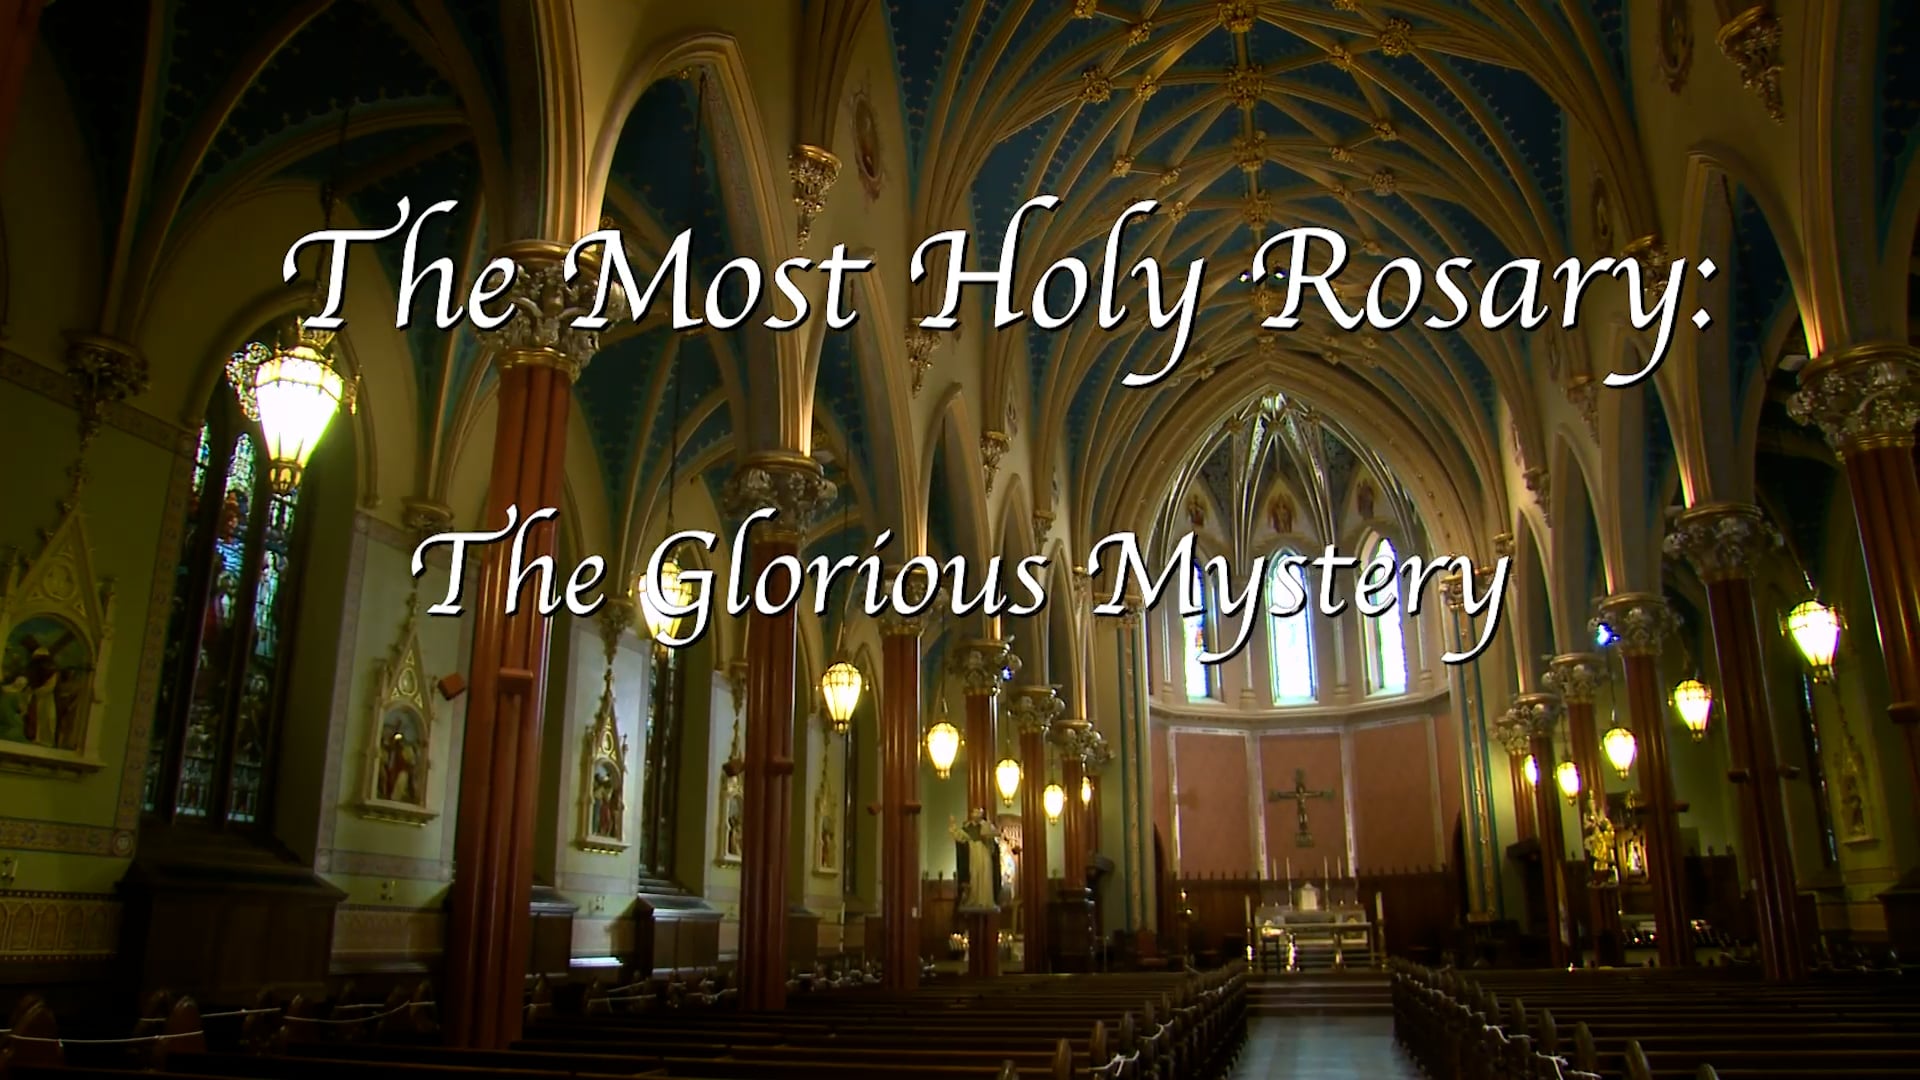 The Rosary: The Glorious Mysteries led by Bishop John Barres